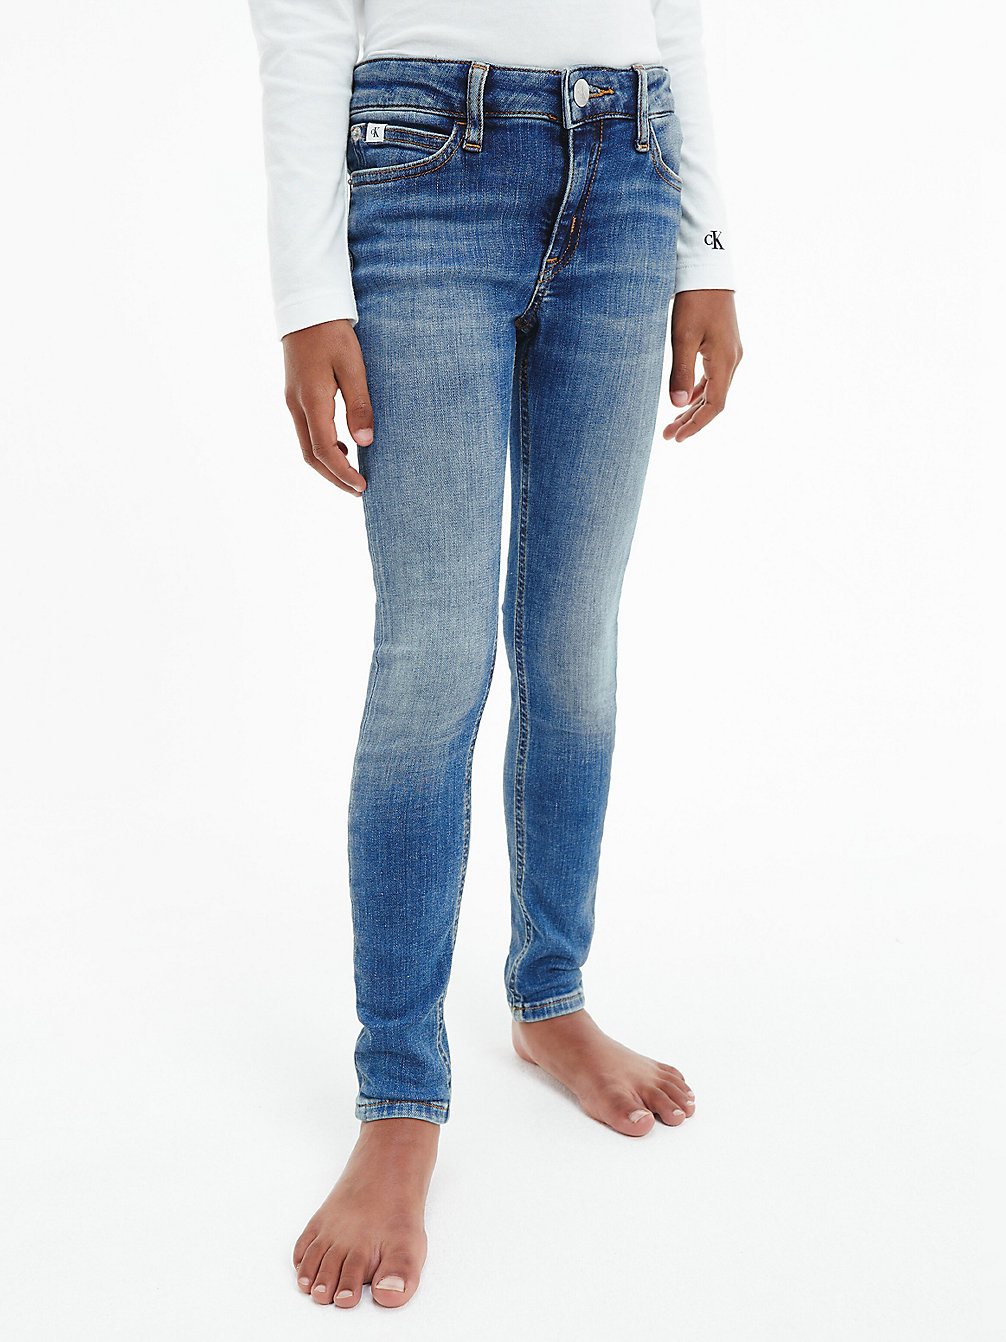 ESS MID OCEAN BLUE Mid Rise Skinny Jeans undefined girls Calvin Klein